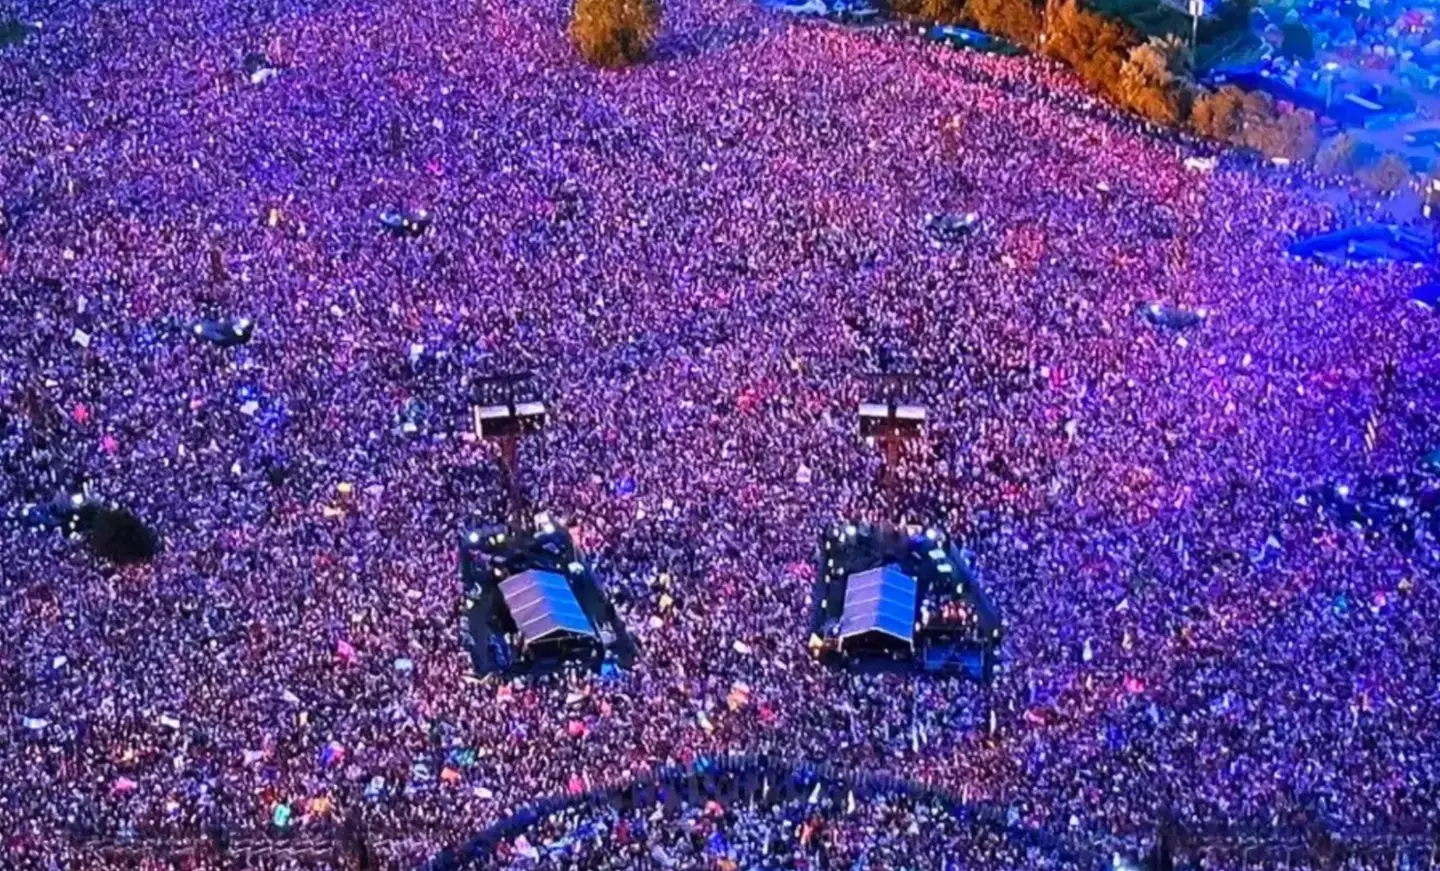 Sir Elton played to what might be the 'biggest ever' Glastonbury crowd.